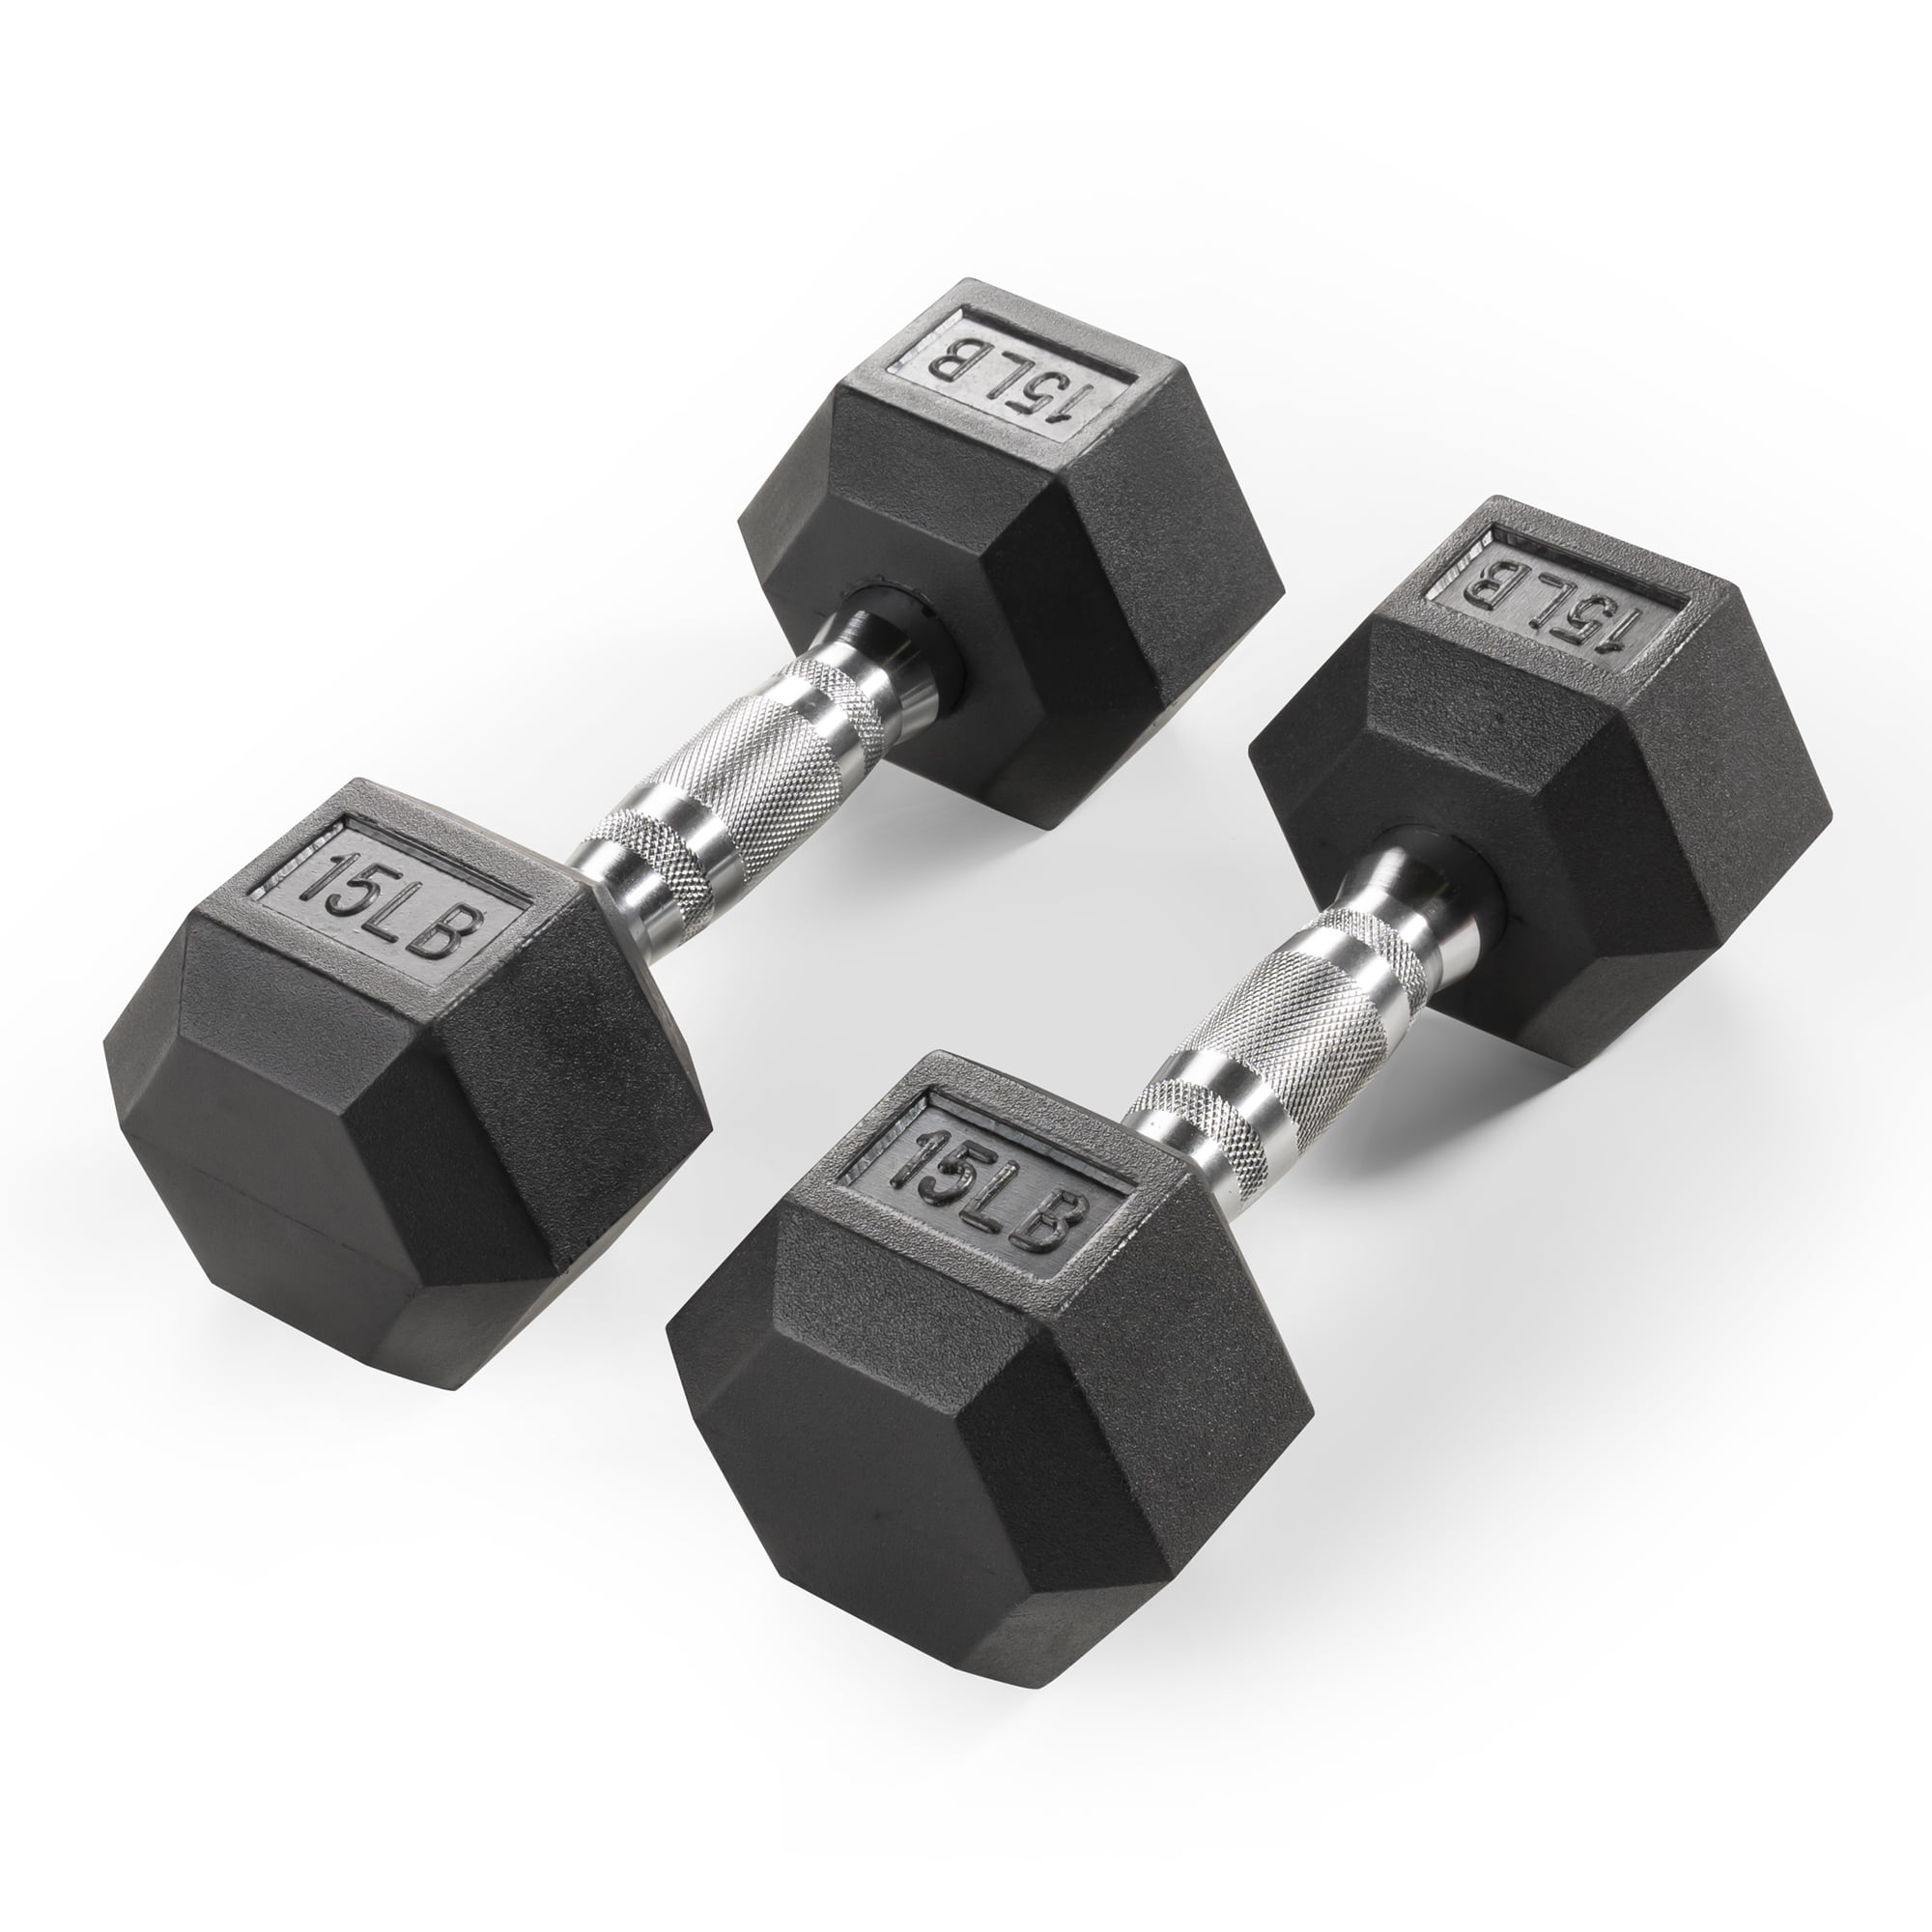 Ditch Metal Weights for Rubber: Weider 20 lb Hex Dumbbells’ Top 10 Perks